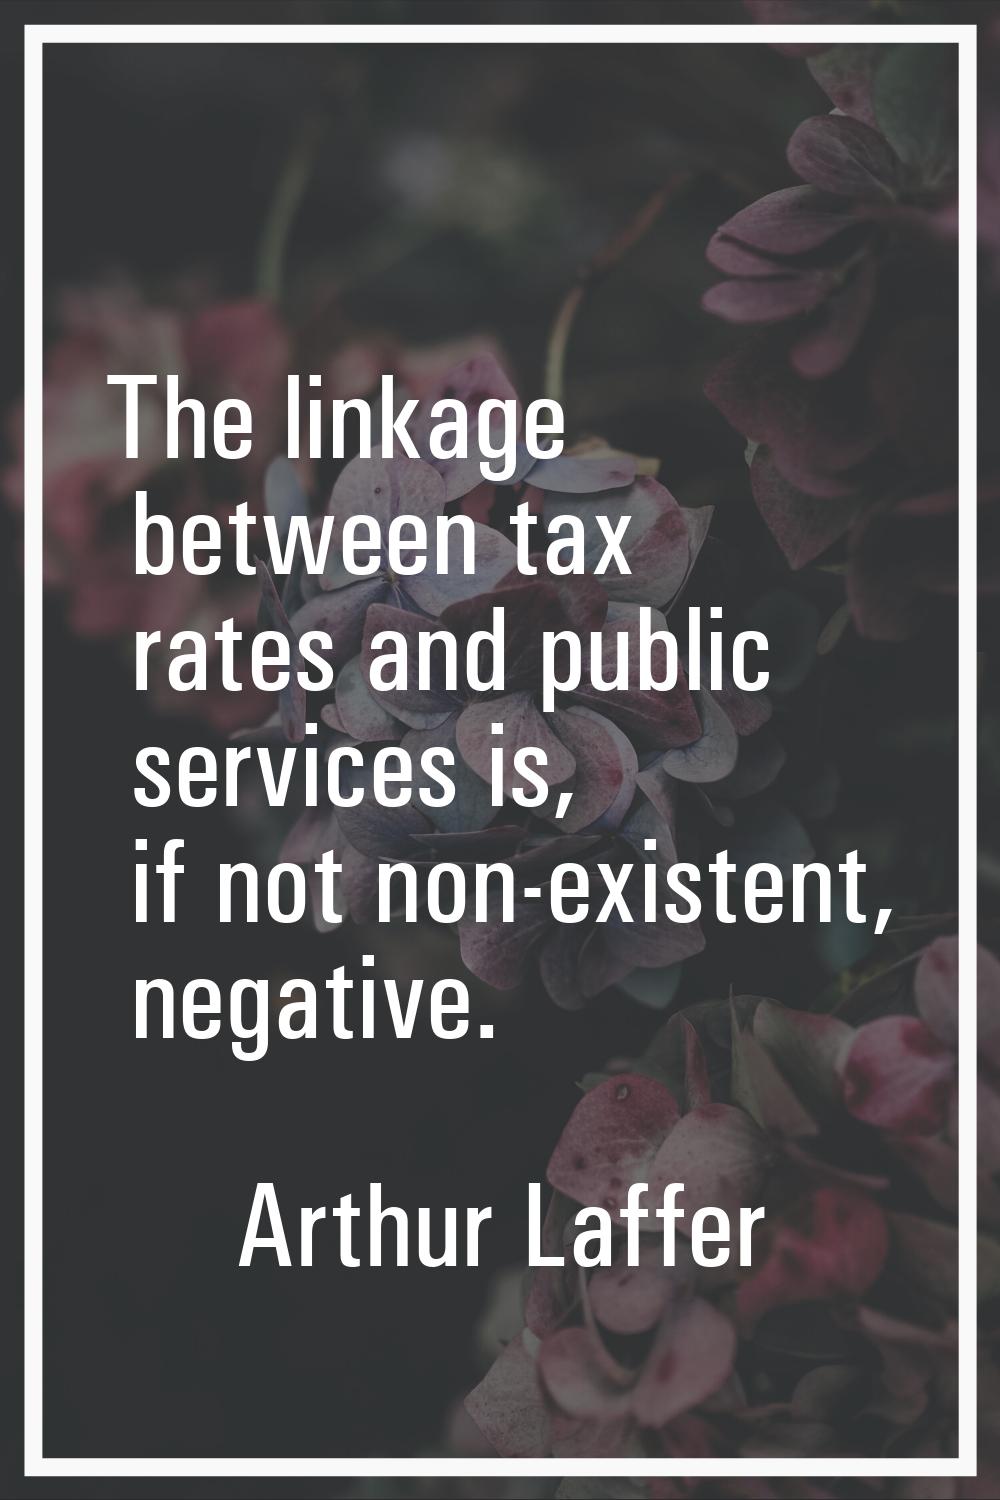 The linkage between tax rates and public services is, if not non-existent, negative.